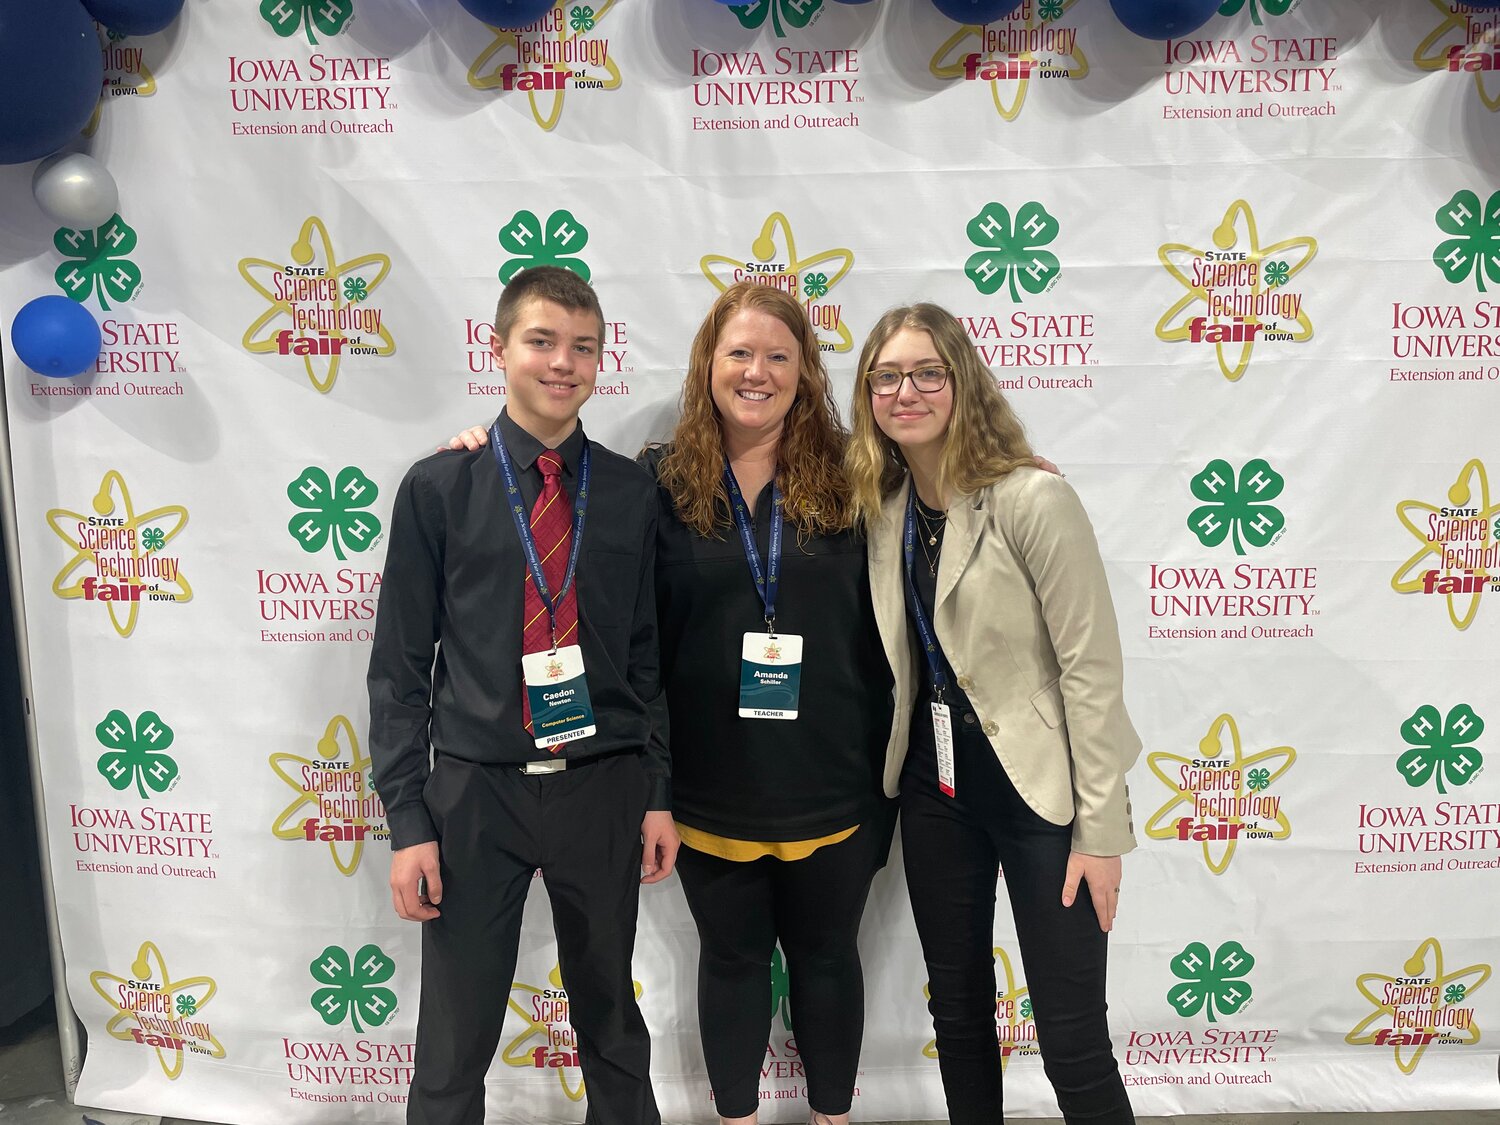 Central Lee 8th graders Caedon Newton, left, and Addison Hohl, right, pose with Central Lee science teacher Amanda Myhre at a recent STEM event. The two students have been selected to present their projects at a national symposium in Washington D.C. next month.